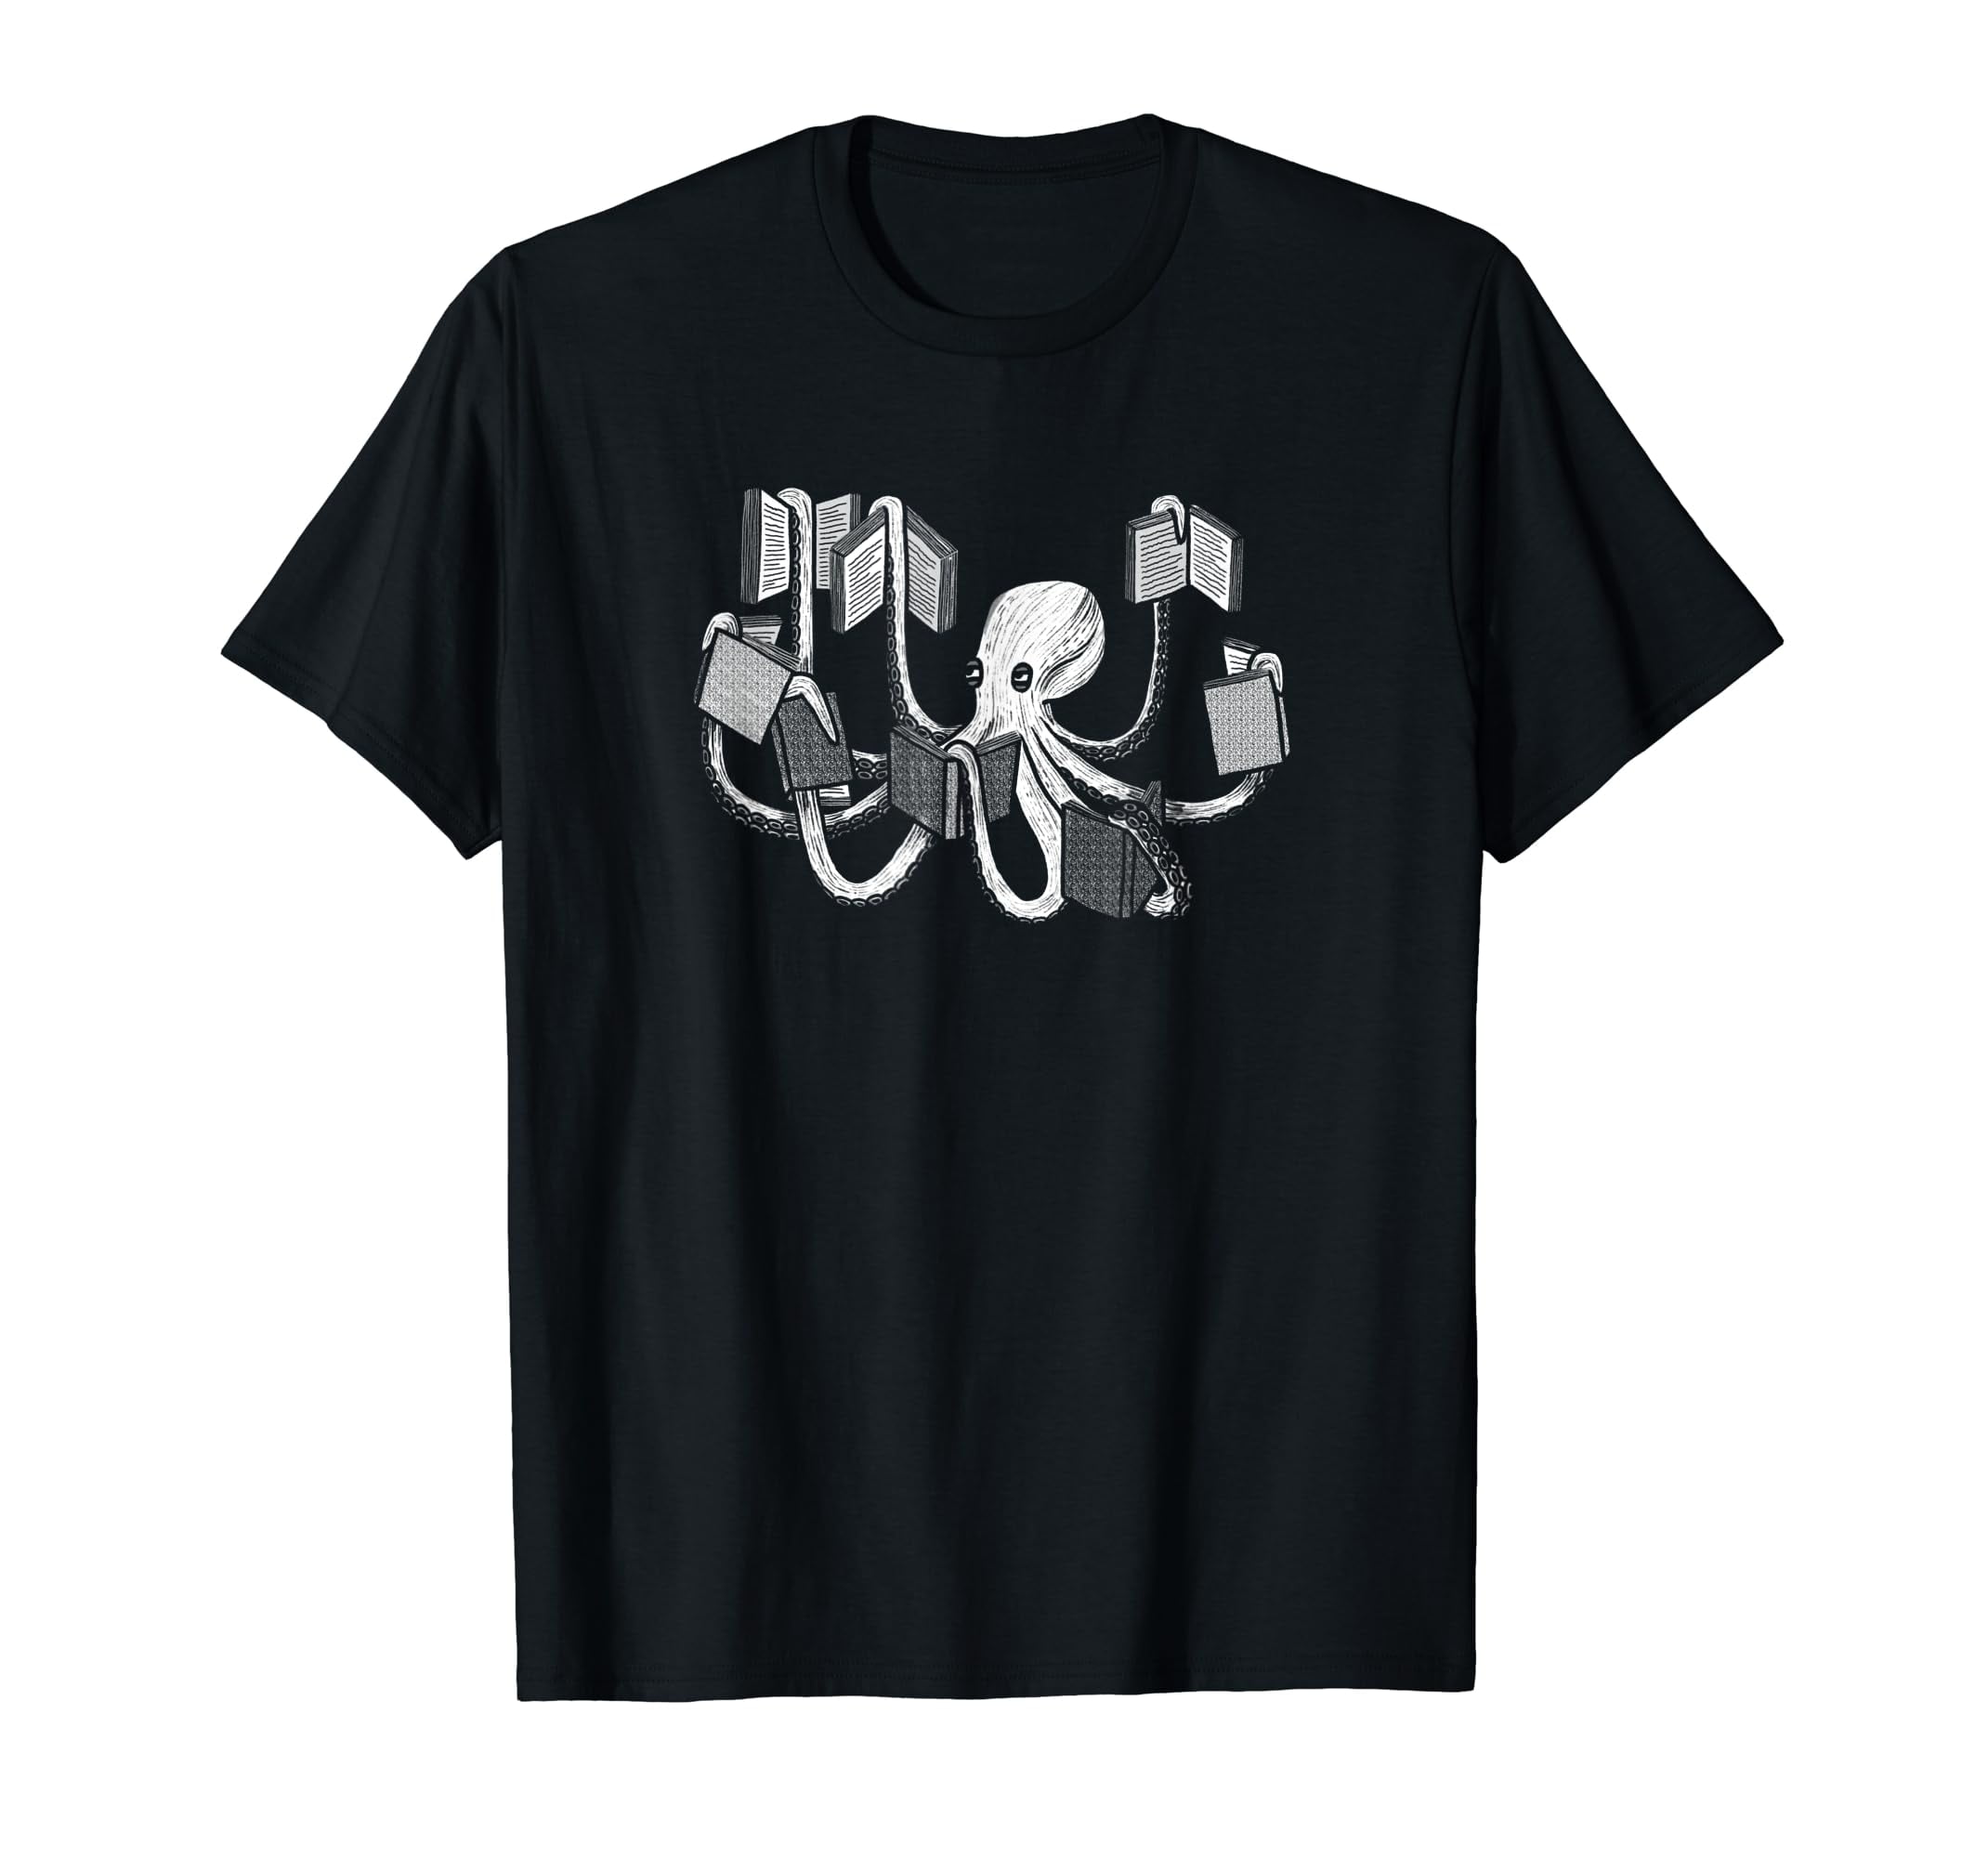 Armed With Knowledge - Book Loving Octopus Librarian Art T-Shirt ...